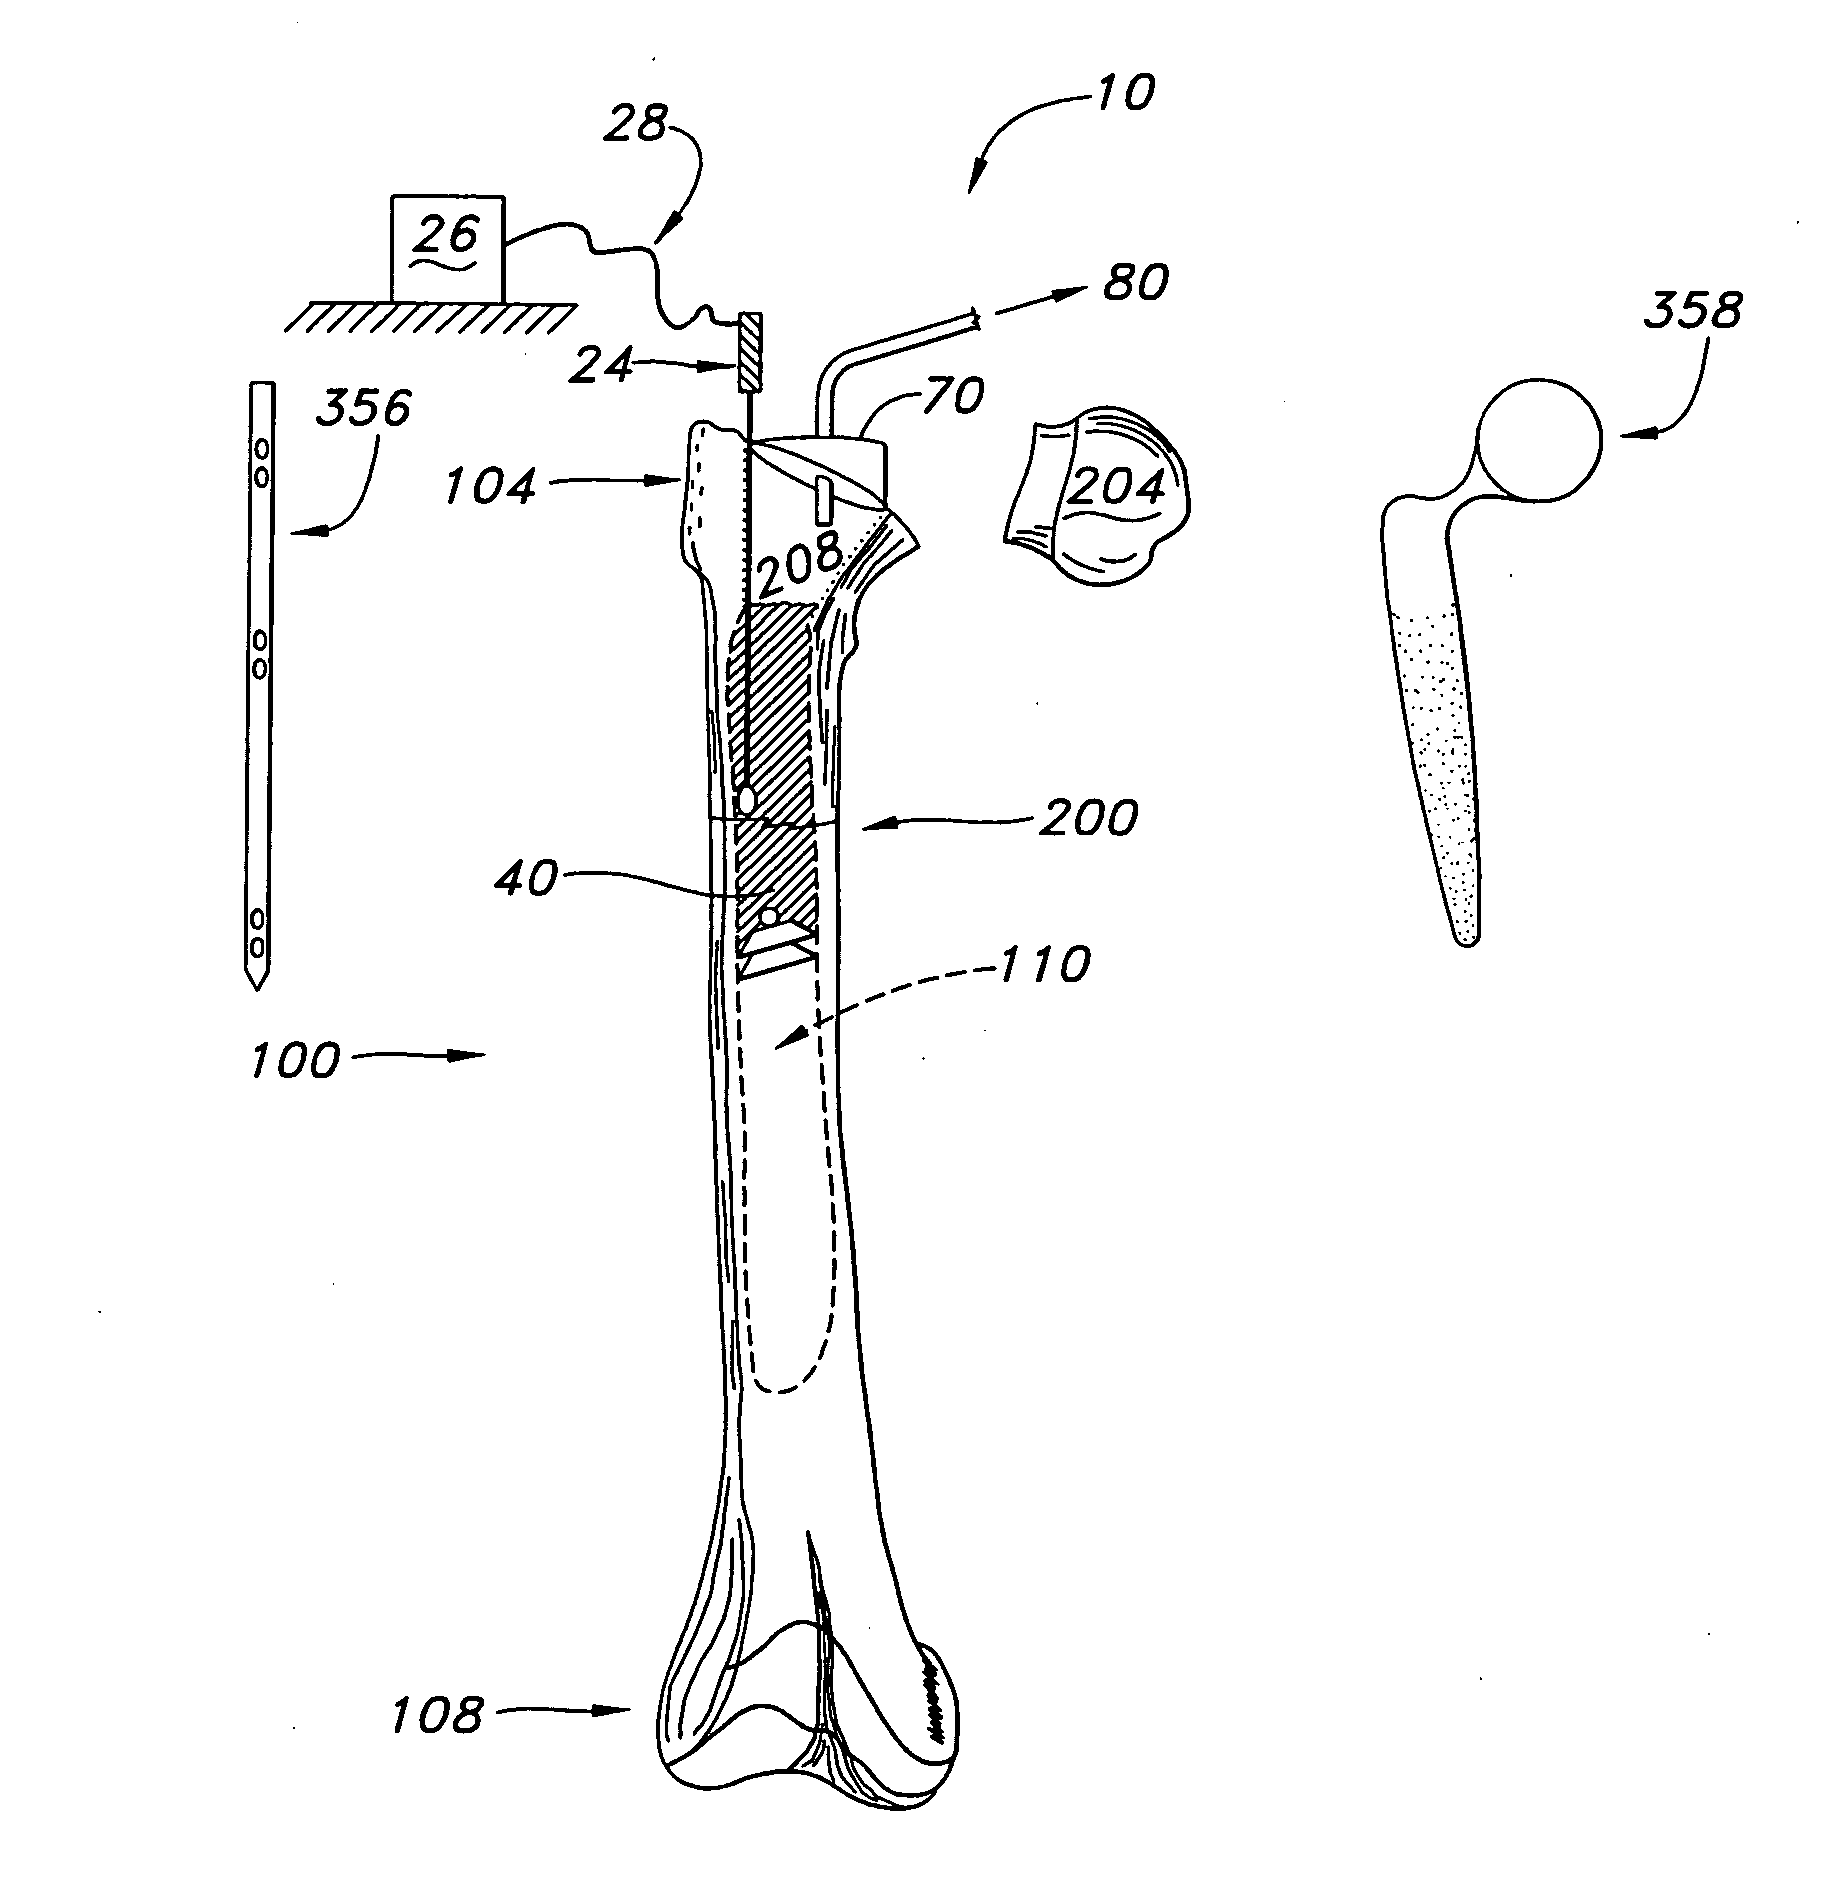 Method and apparatus for strengthening the biomechanical properties of implants